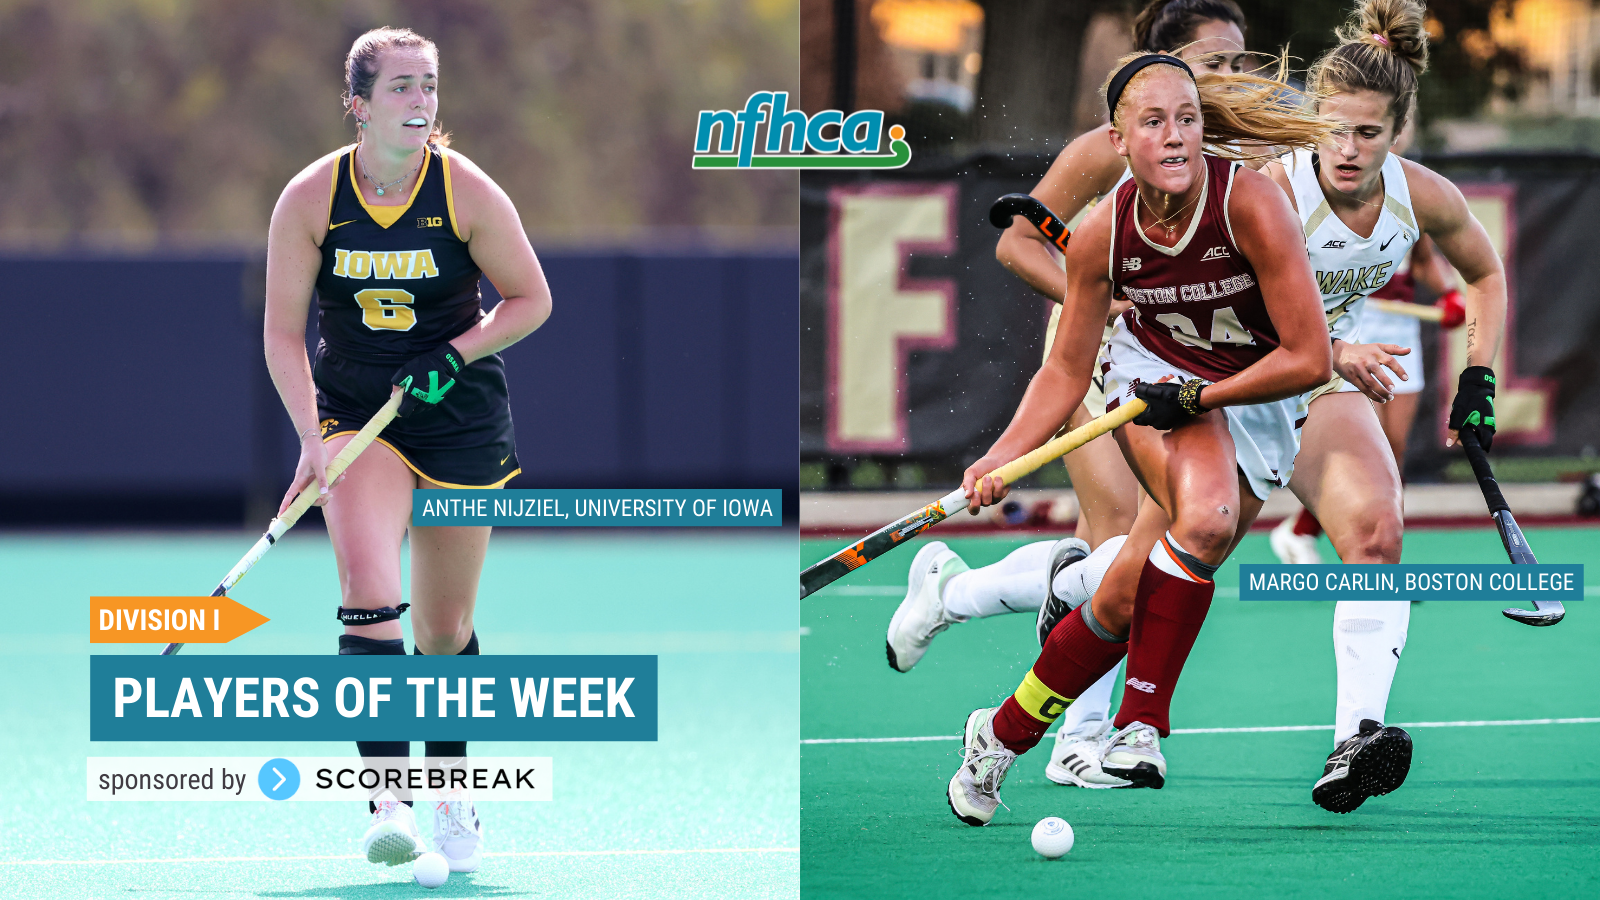 Carlin, Nijziel named NFHCA Division I National Players of the Week